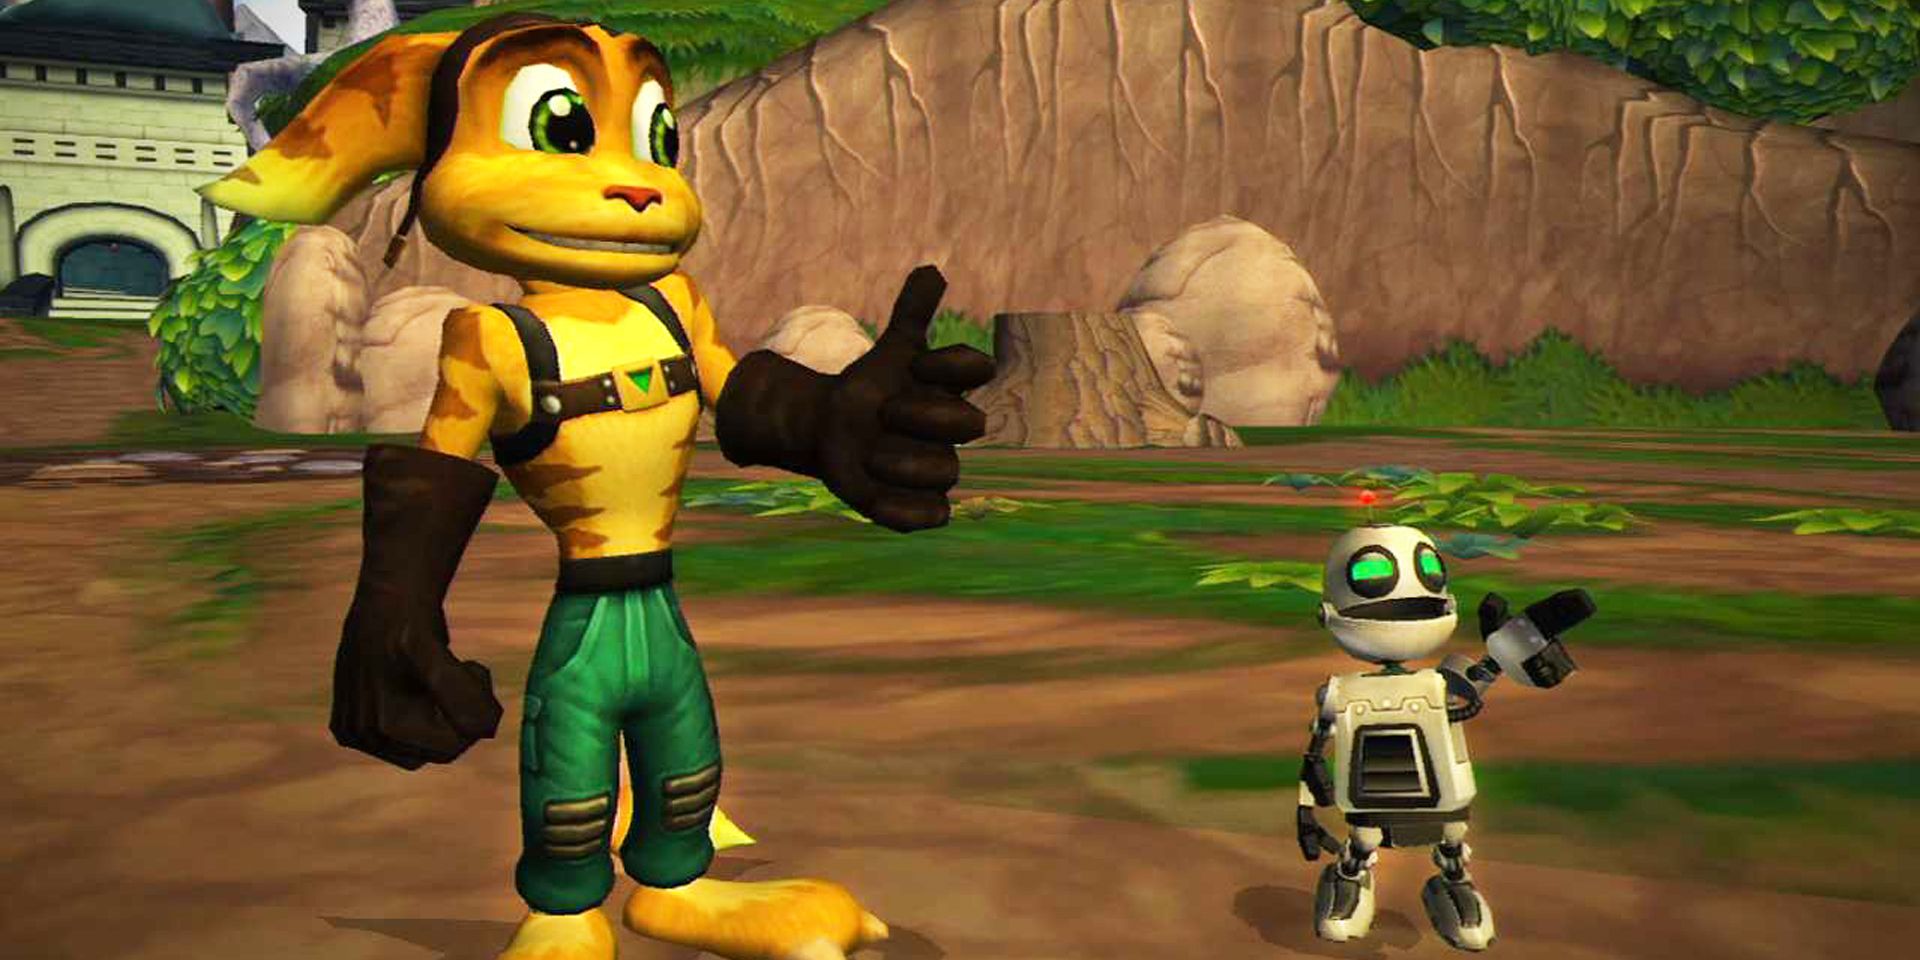 Ratchet & Clank get a message in a cutscene